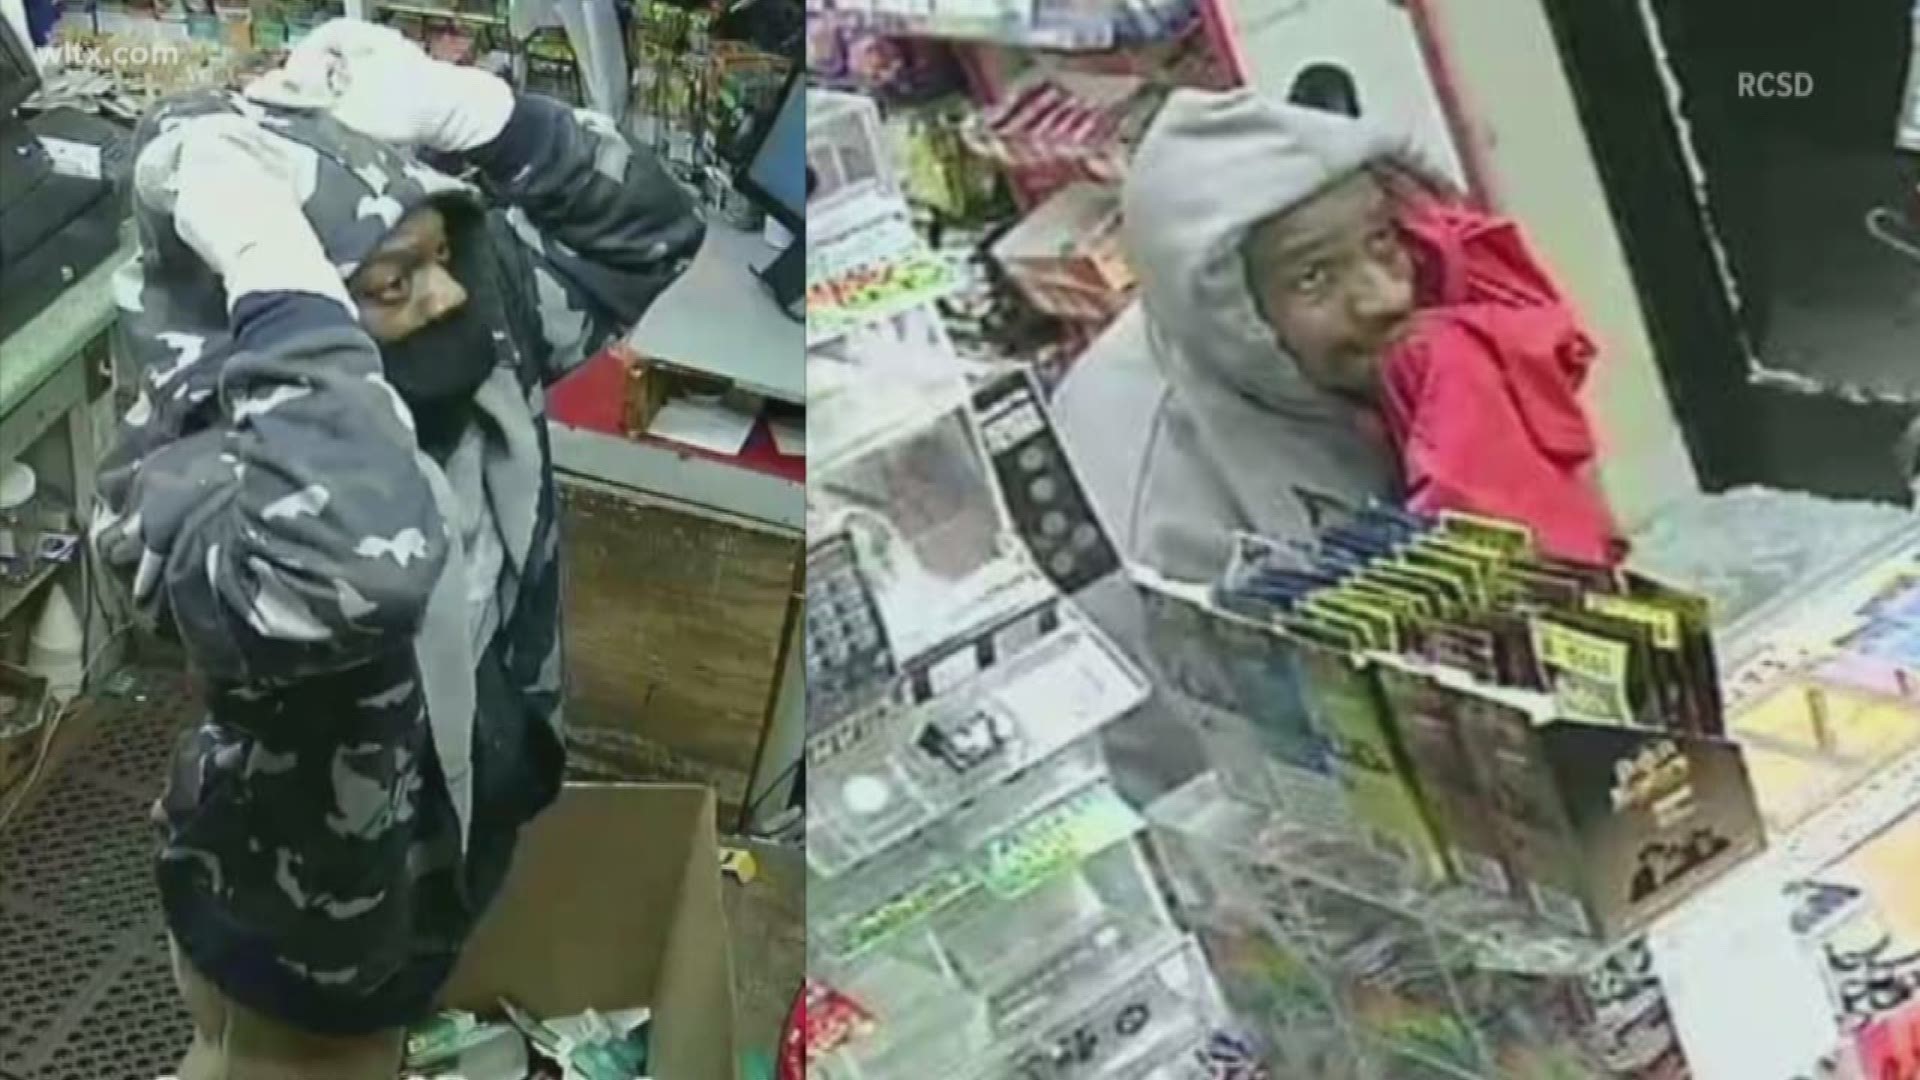 Richland County deputies are looking for three suspects after a series of burglaries.